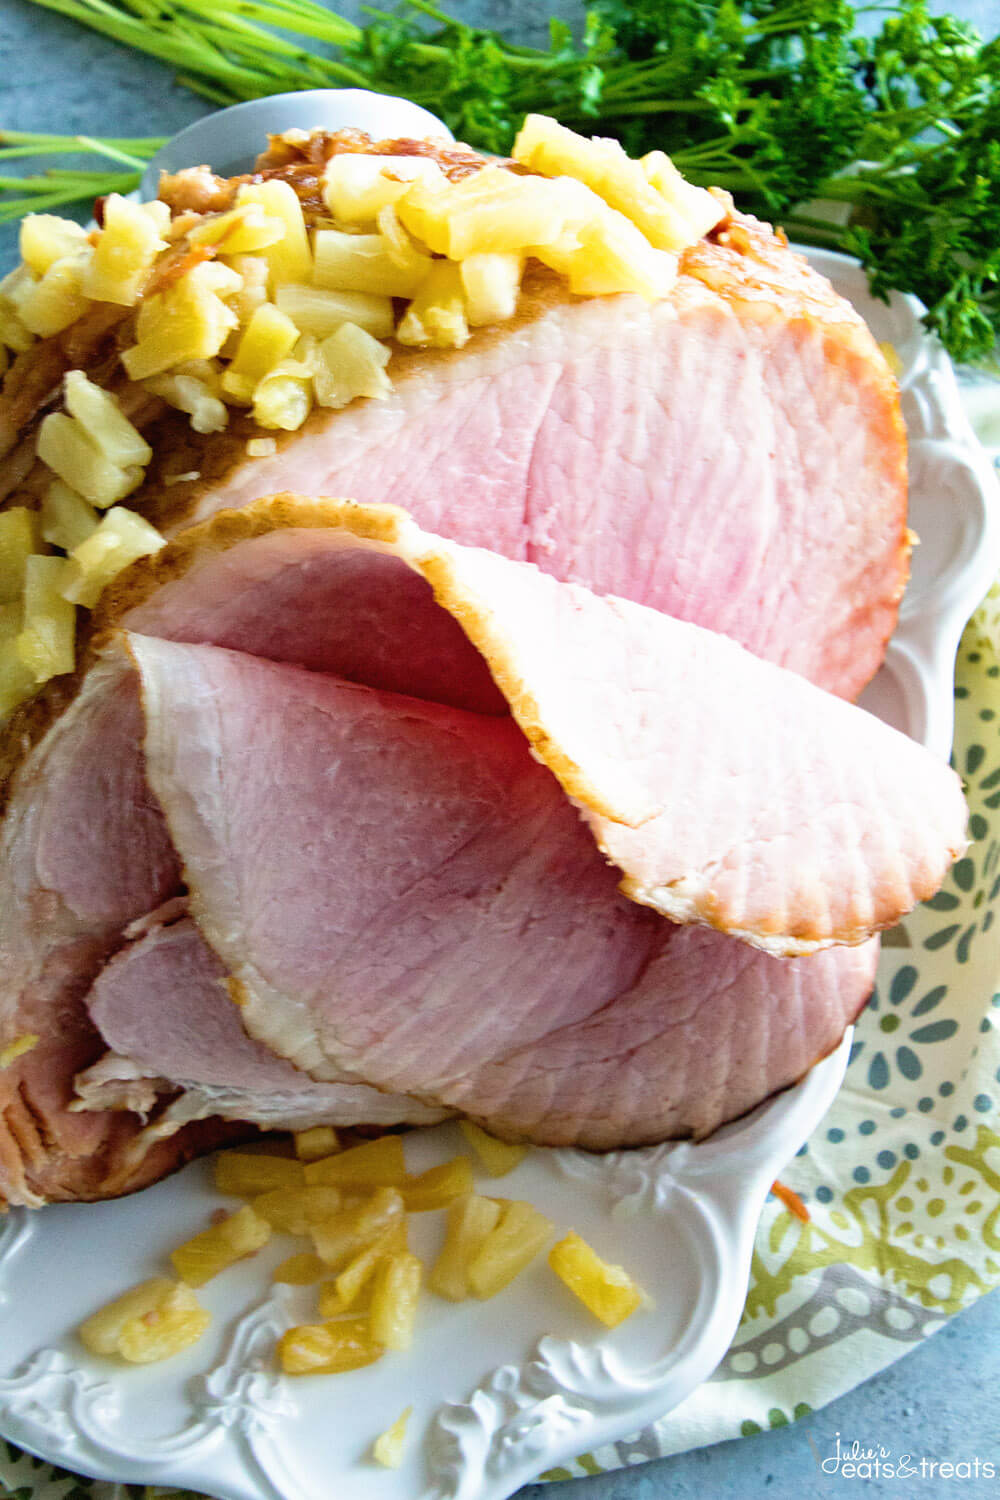 This Easter dinner meal plan has everything you need for a fantastic Easter, from appetizers, main dishes, and desserts, to table decor and printables!